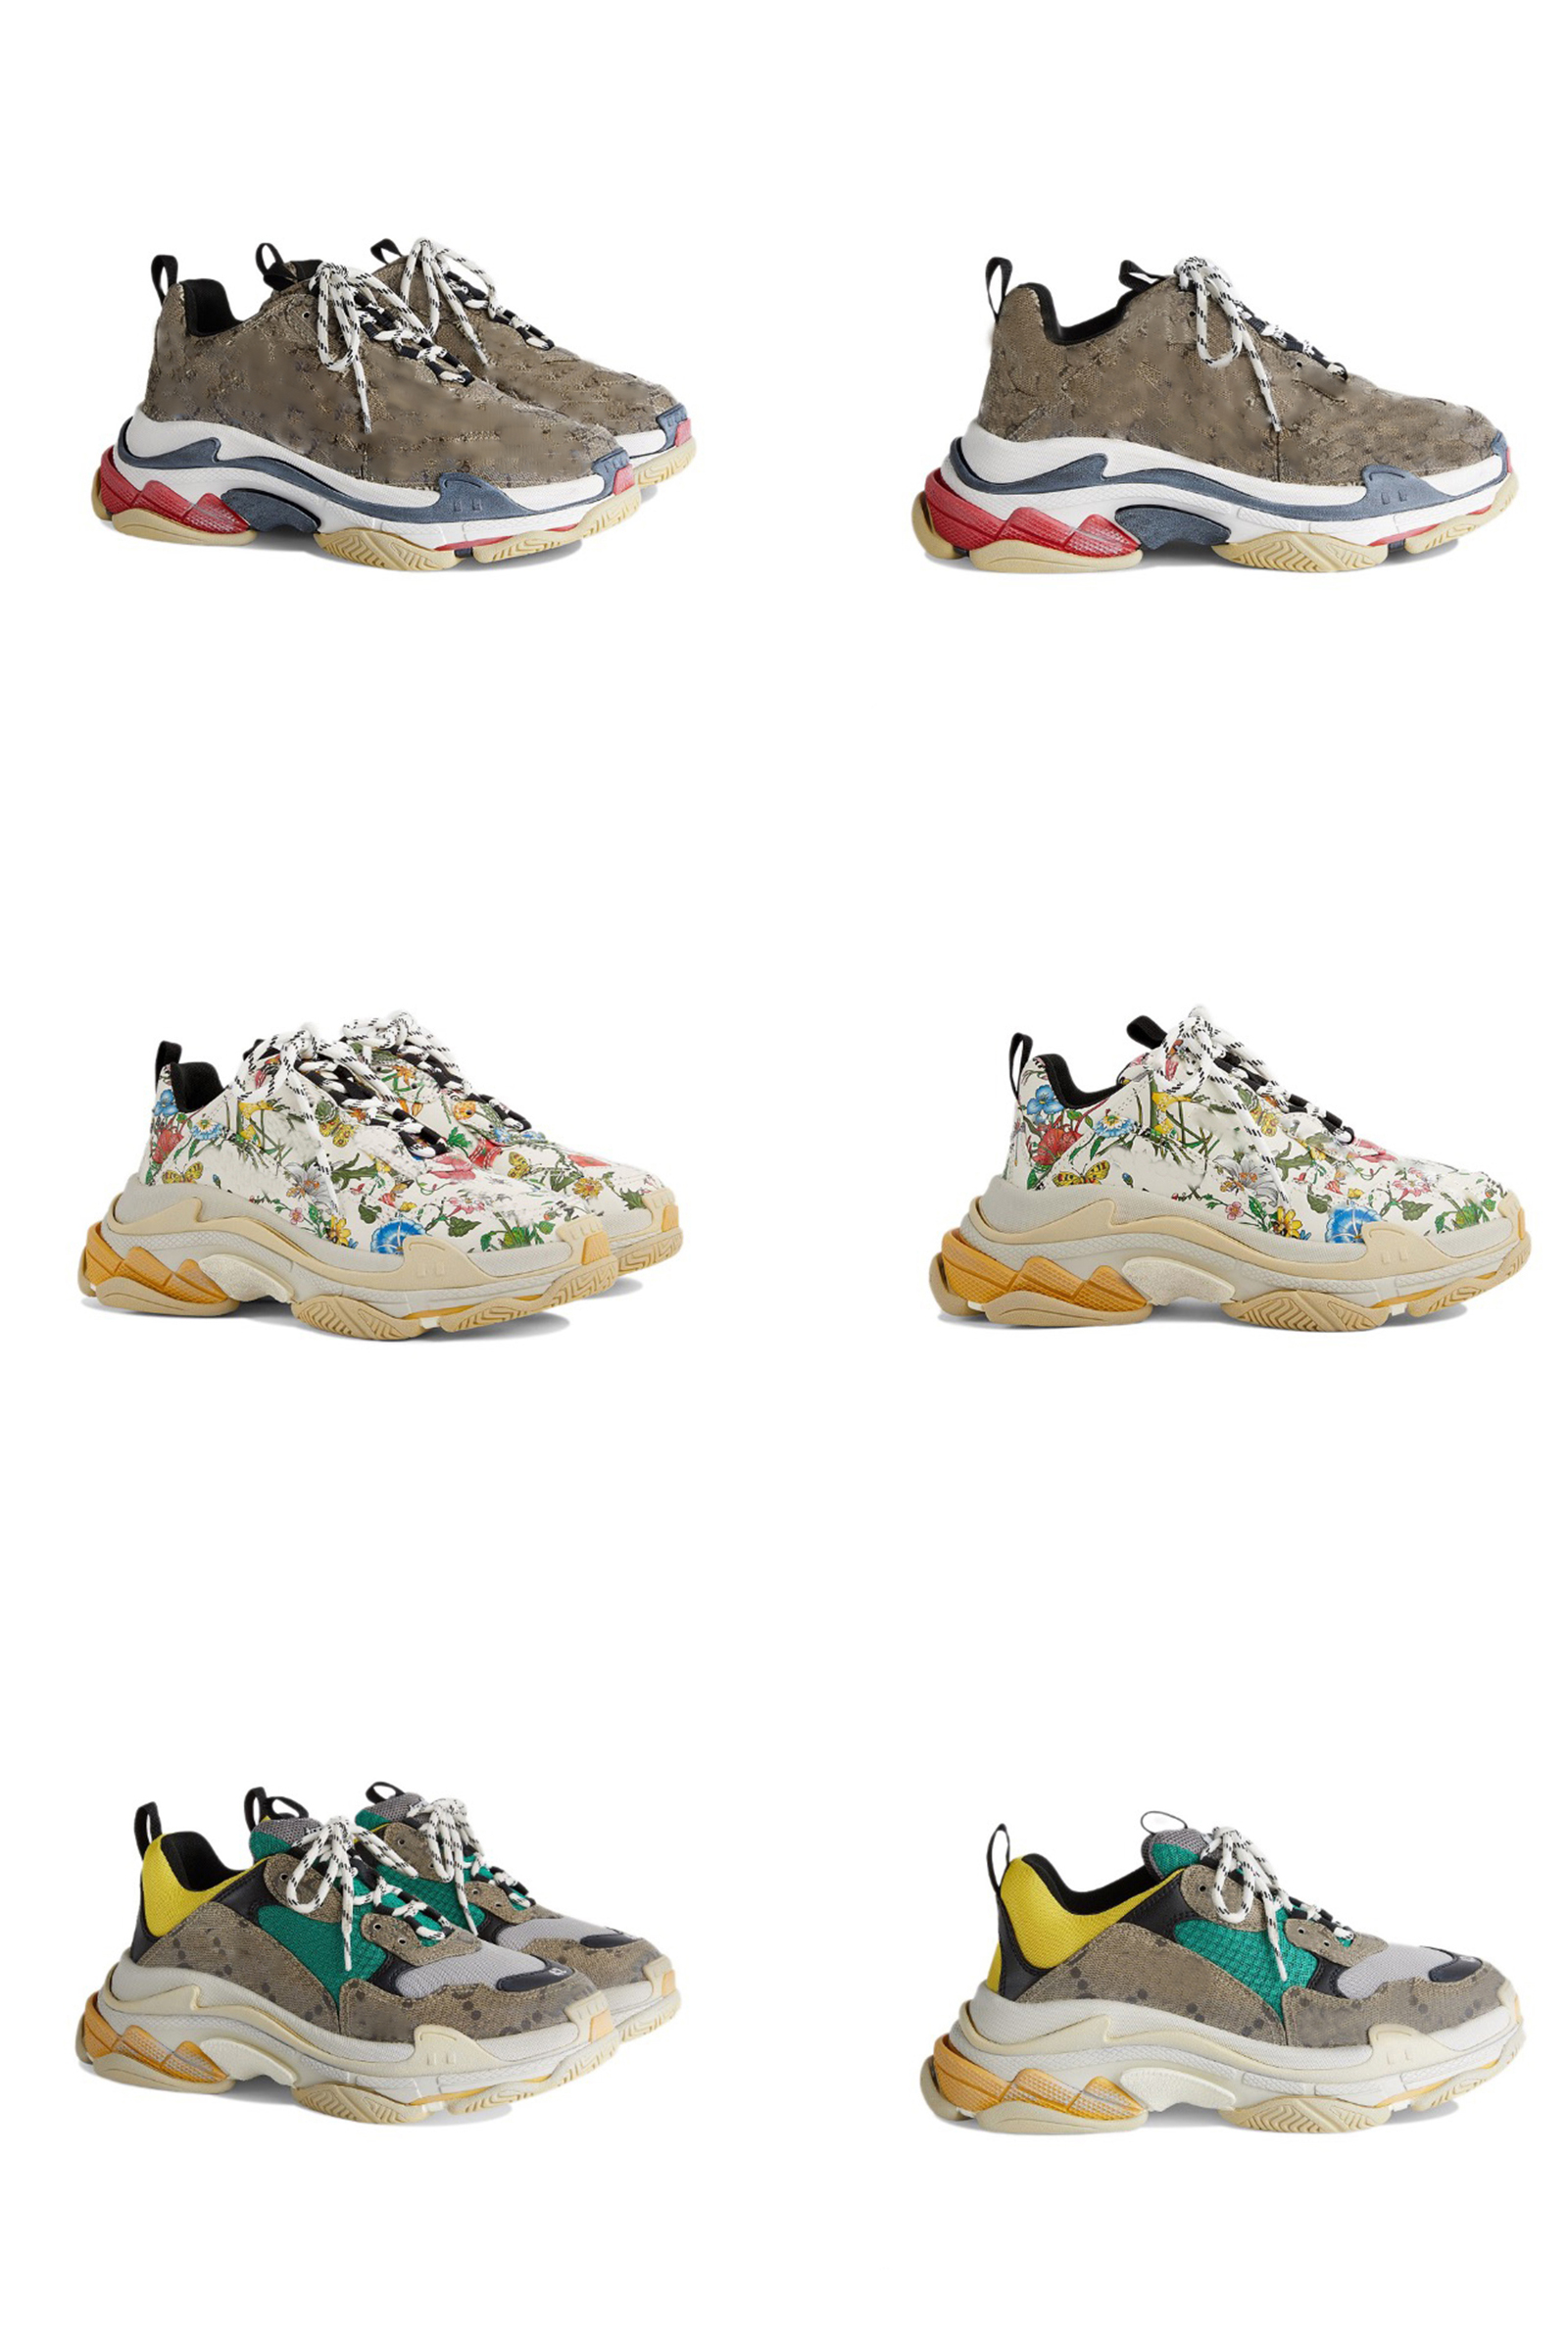 

Authentic The Hacker Project Triple S Beige Green Yellow Flora Print Shoes Men Women Trainers Old Dad Platform Sneakers Paris 17FW Outdoor With Original Box 2022